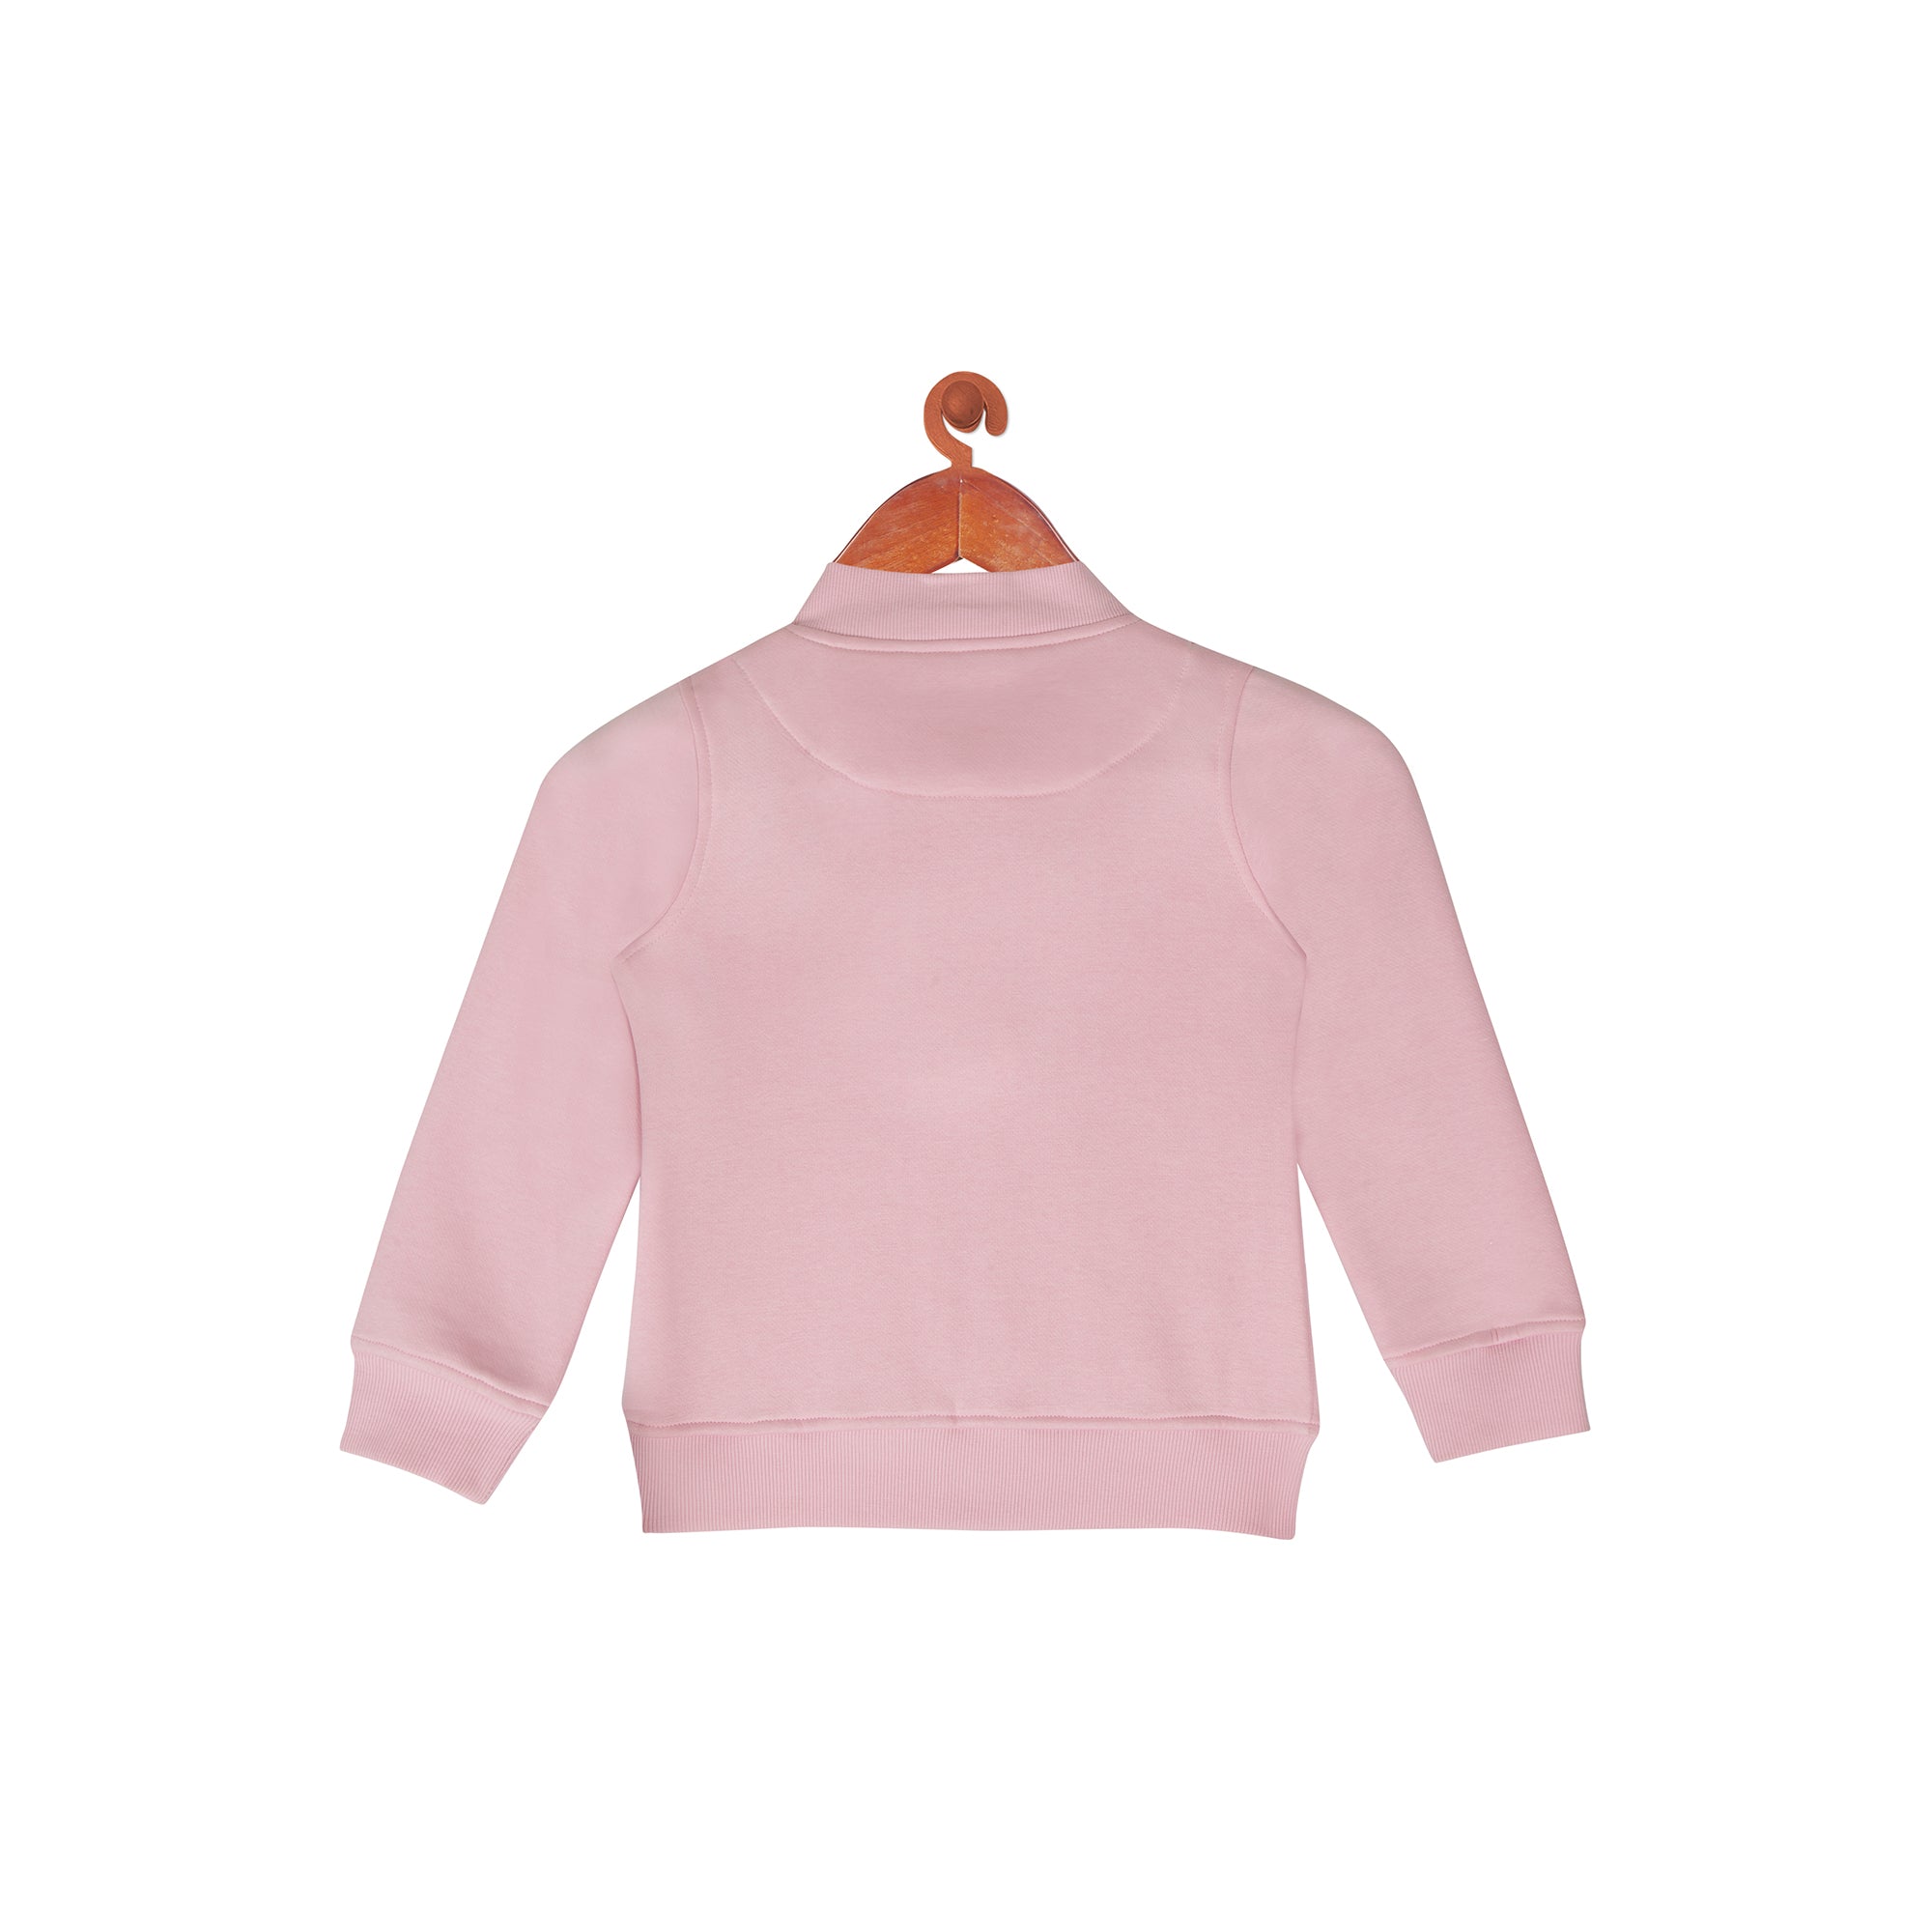 Tiny Girl Basic Zipper Sweatshirt With Front Pockets In Light Pink